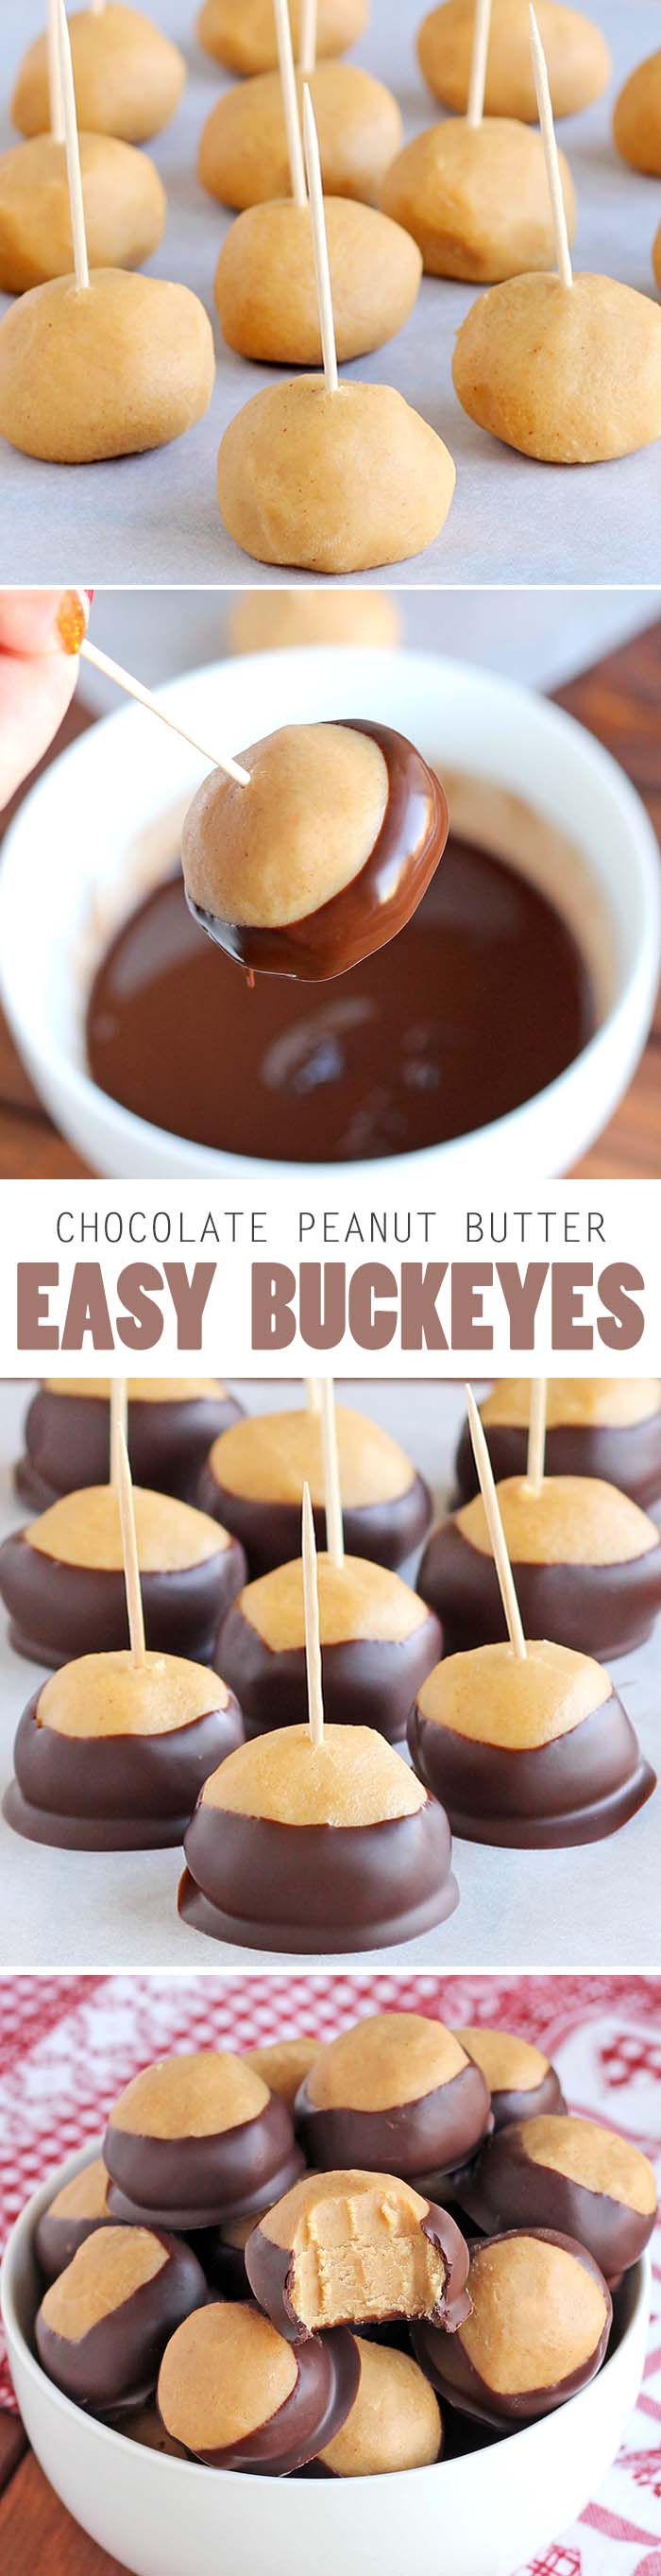 Seriously, you need to make these easy buckeyes. They’re so good, so easy....so delish!